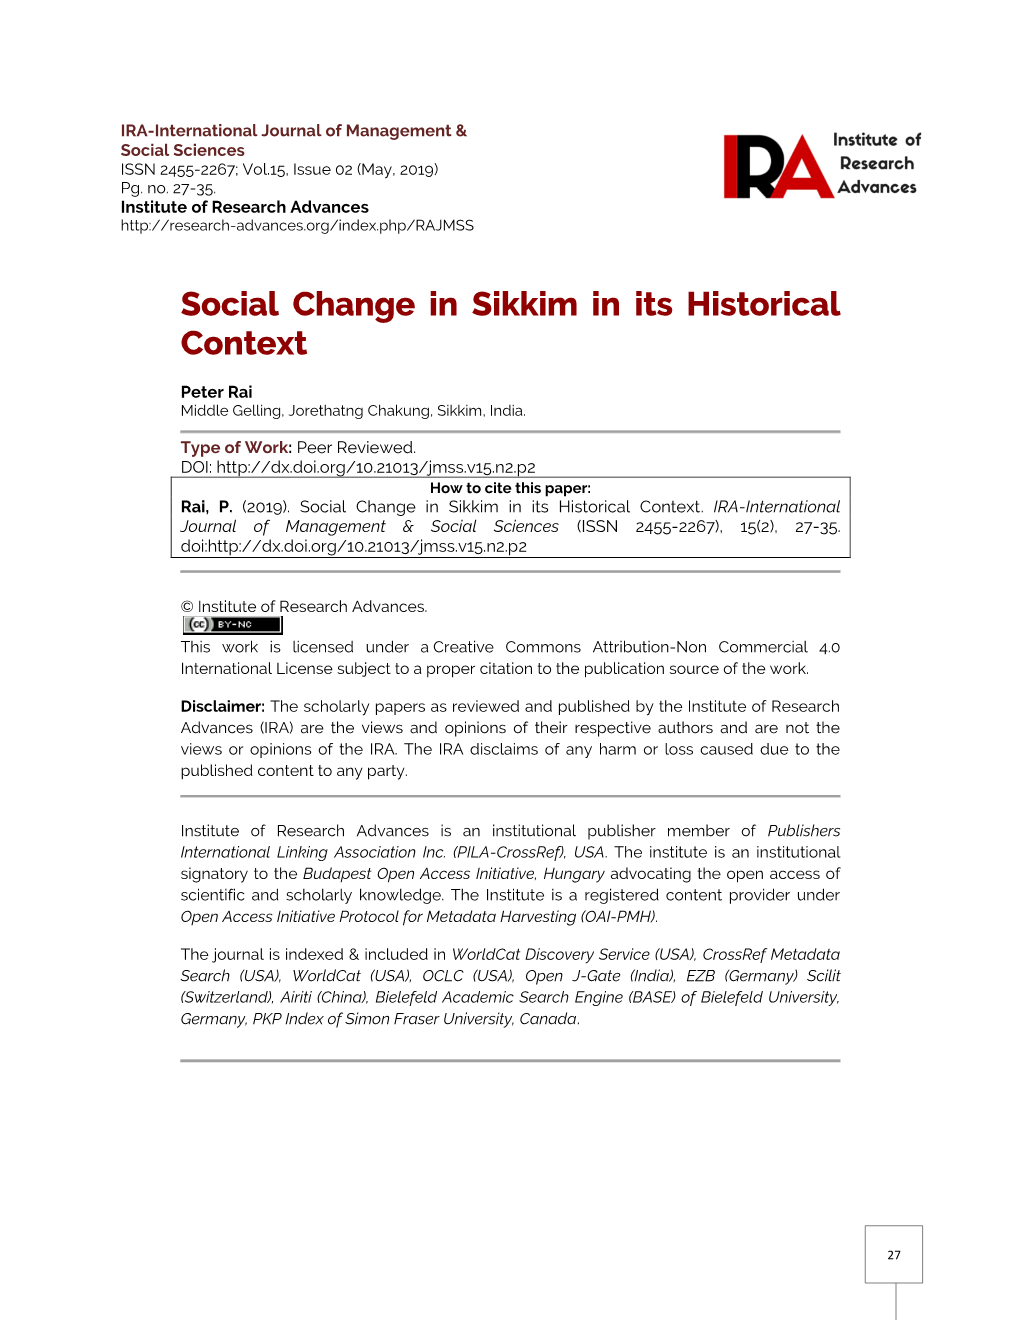 Social Change in Sikkim in Its Historical Context